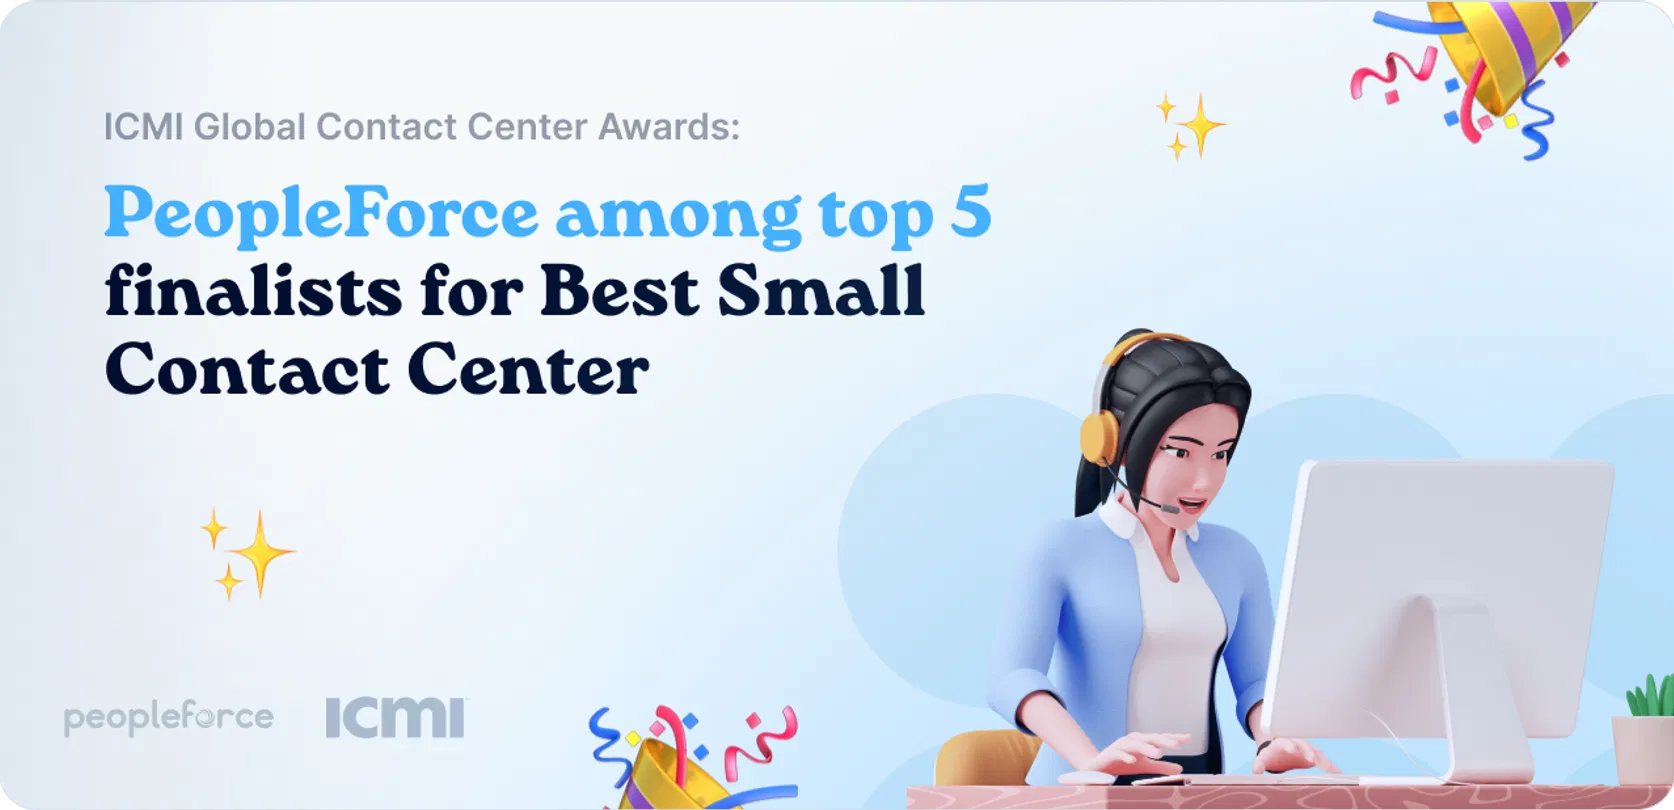 ICMI Global Contact Center Awards: PeopleForce among top 5 finalists for Best Small Contact Center